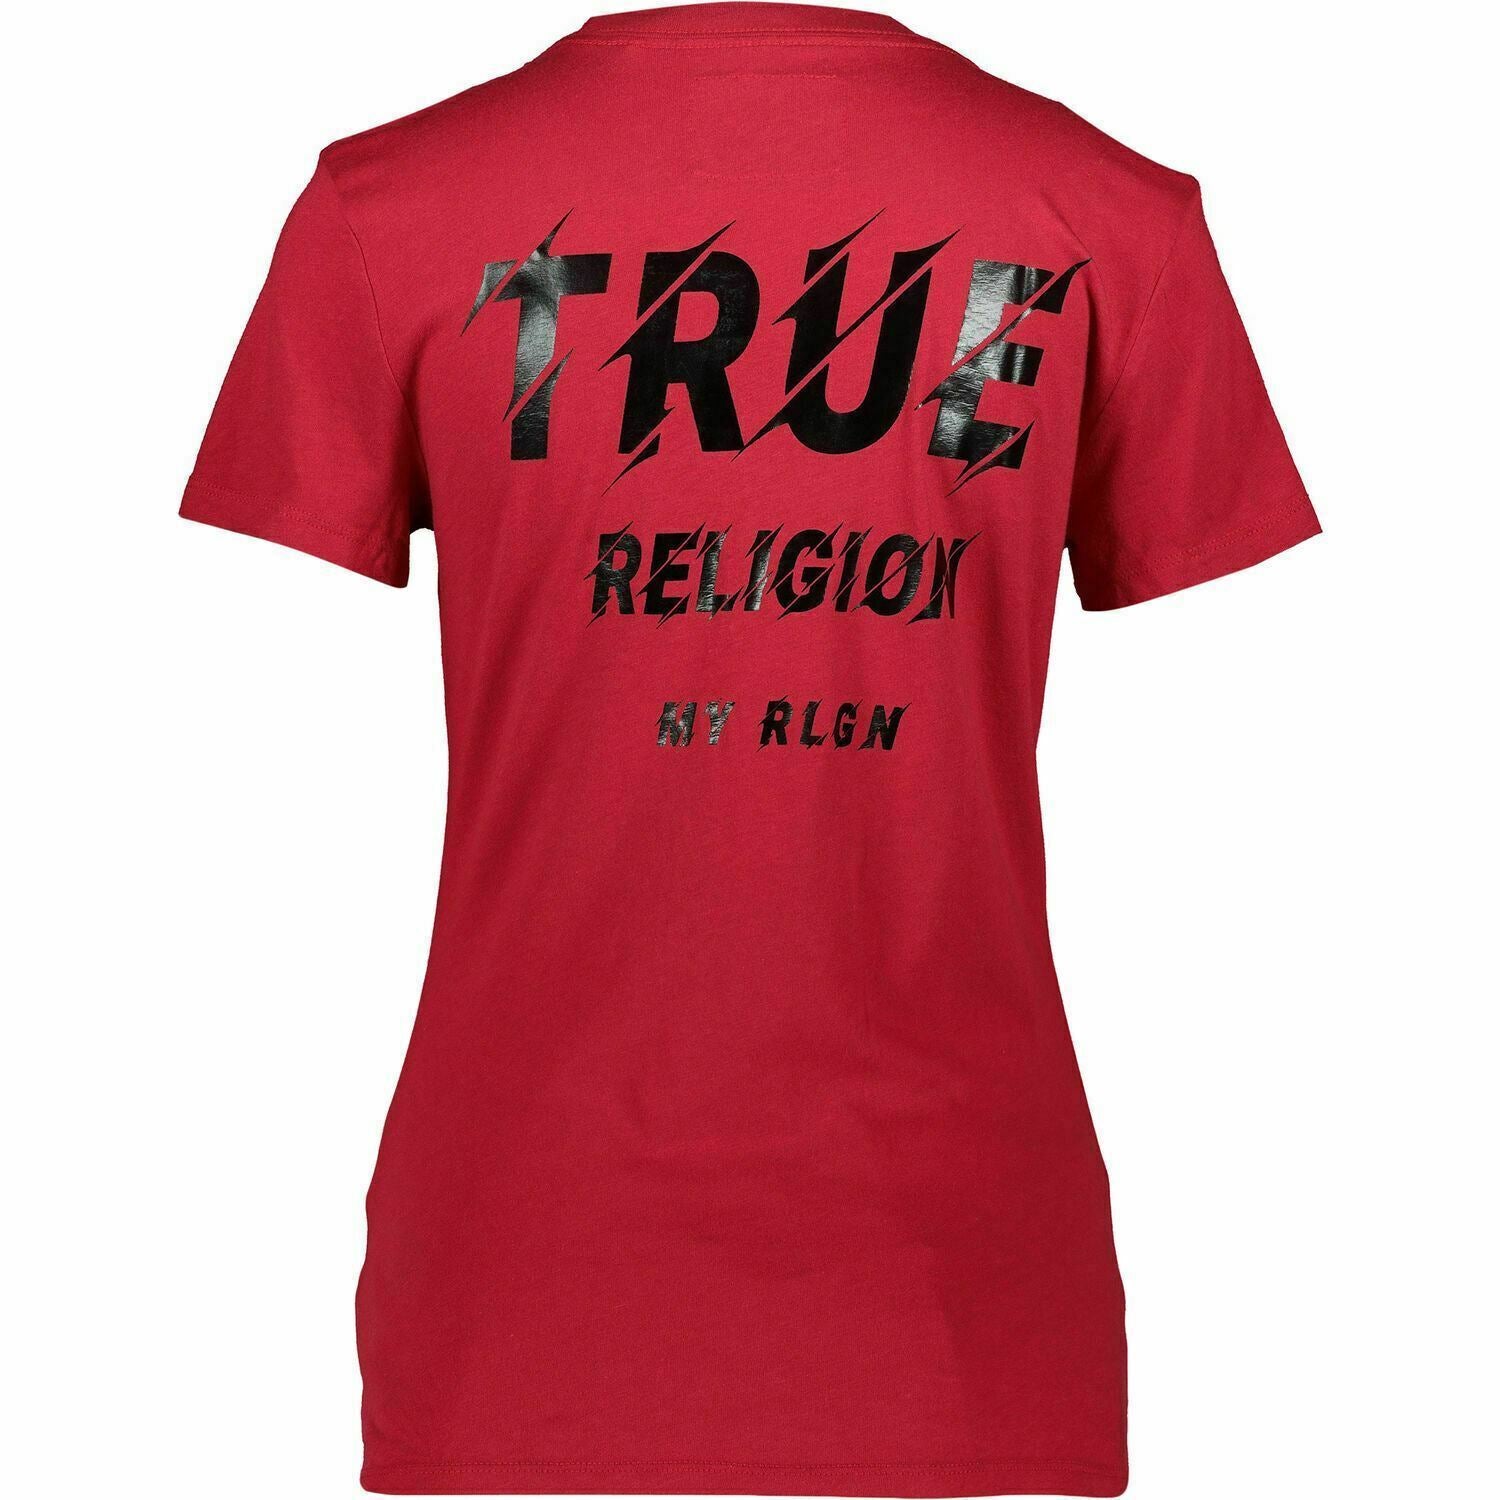 Women's TRUE RELIGION LOGO V-NECK RED T-SHIRT TOP! SIZE S, SMALL